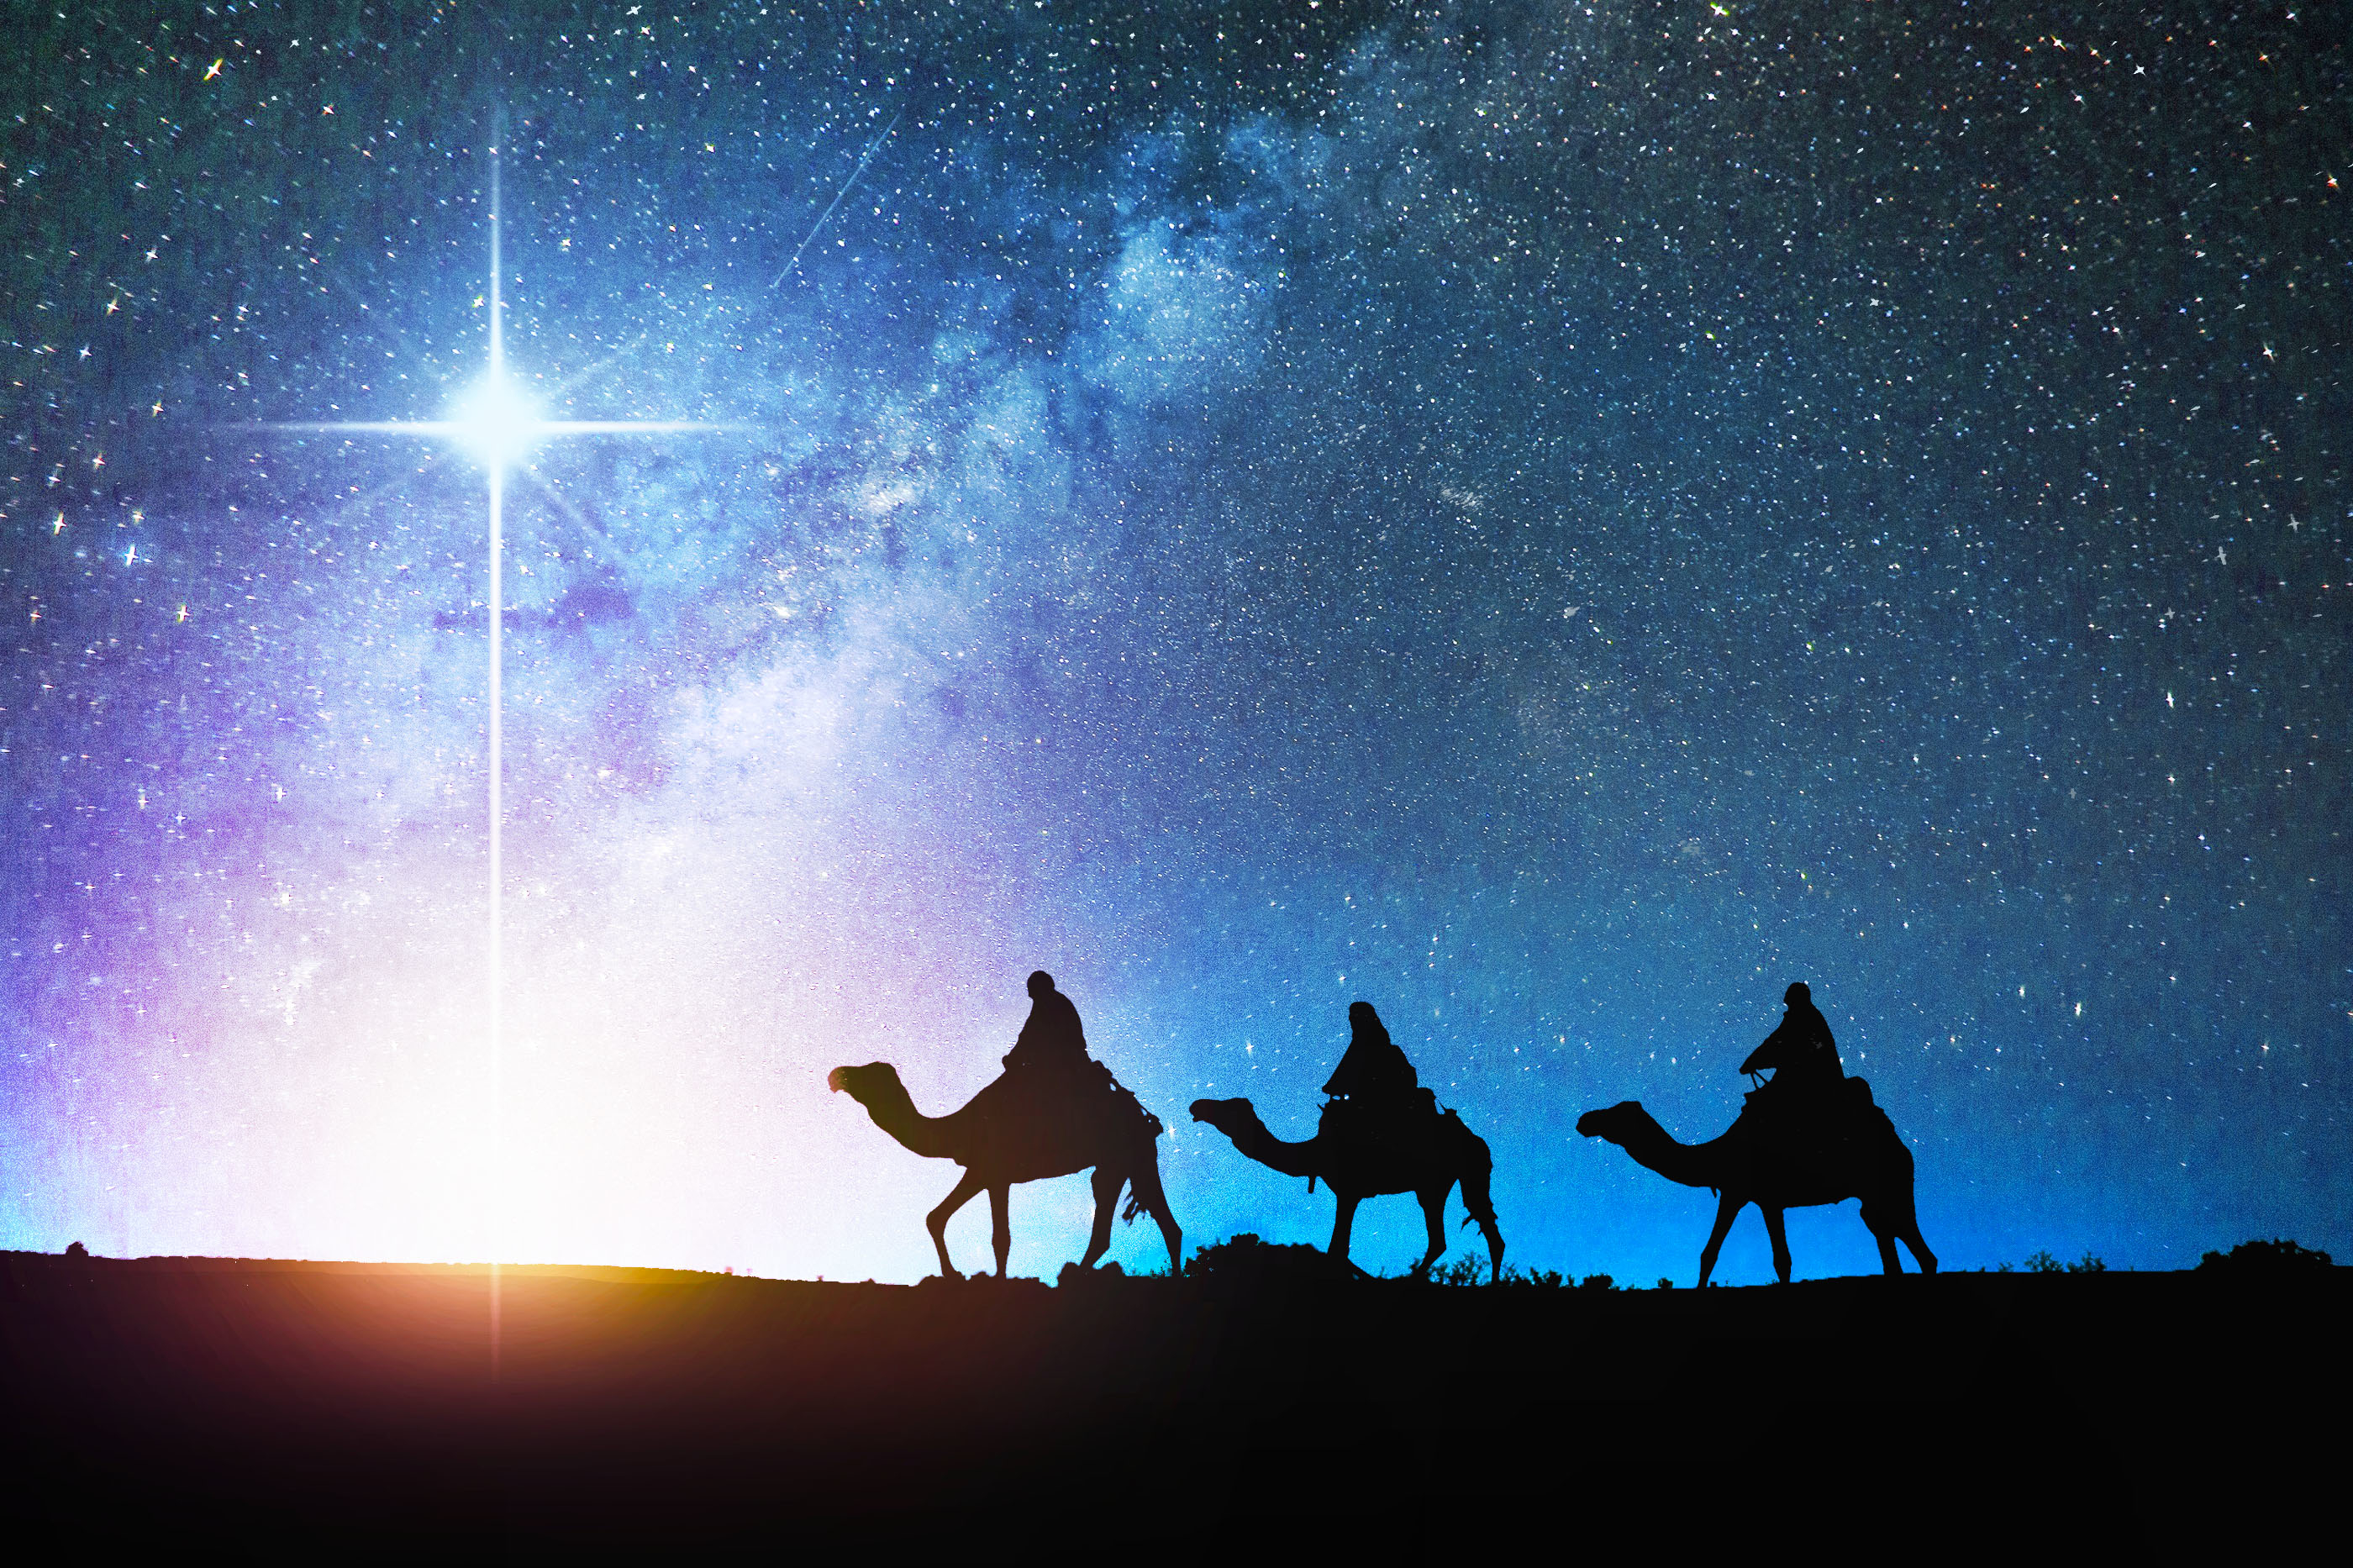 Homily from Jan. 8, 2023: The Epiphany